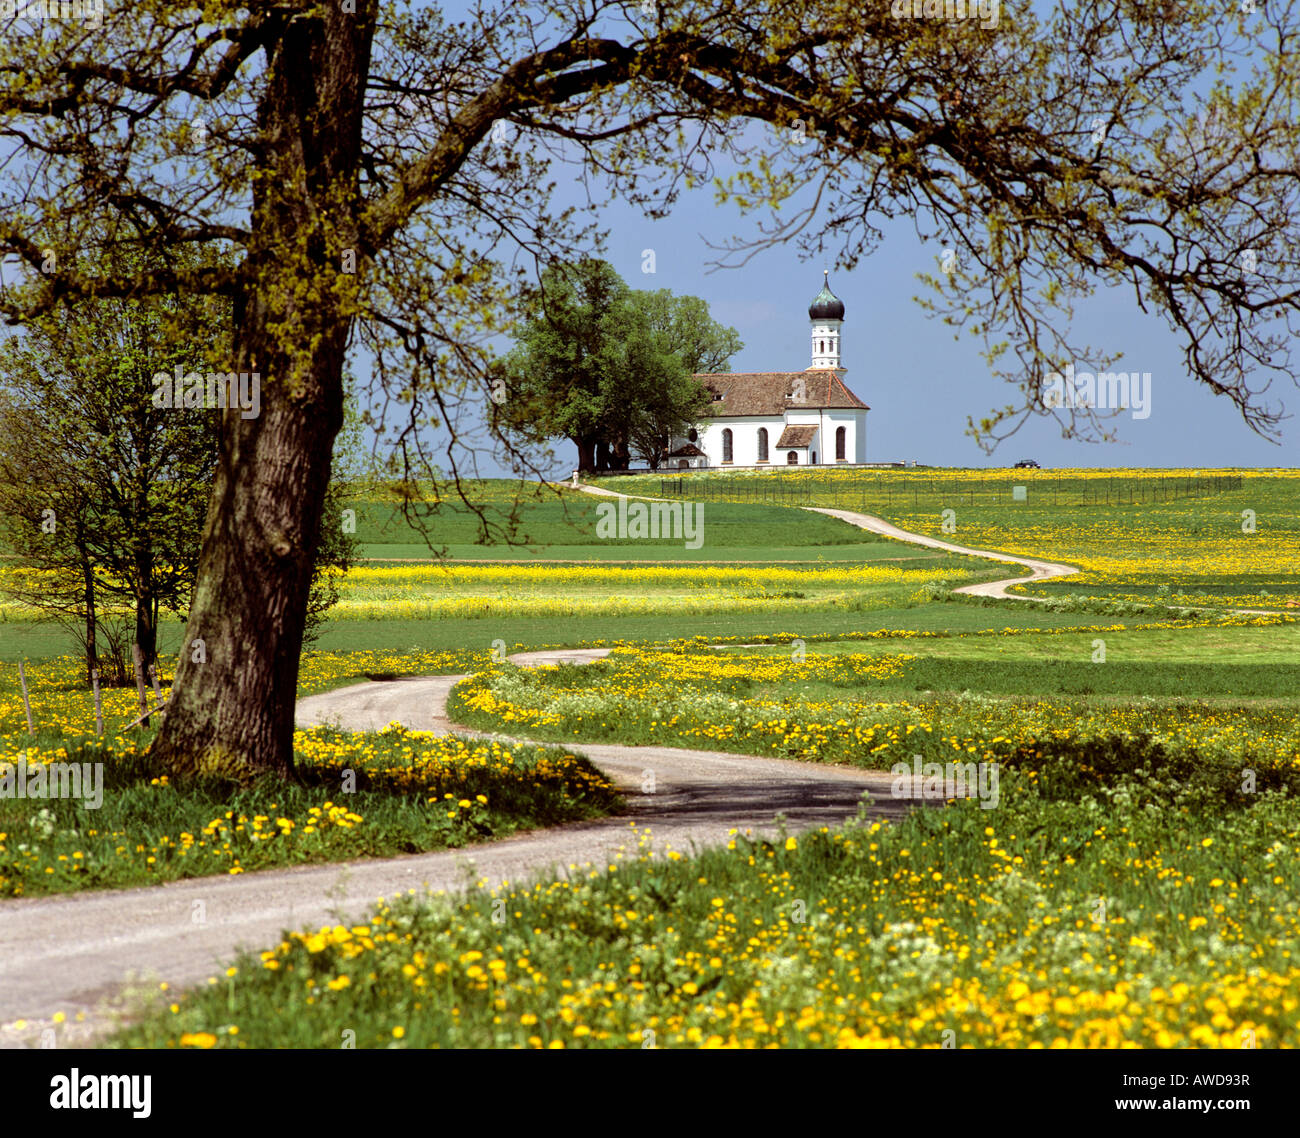 Andreas church near Etting in spring, Weilheim district, Upper Bavaria, Germany Stock Photo